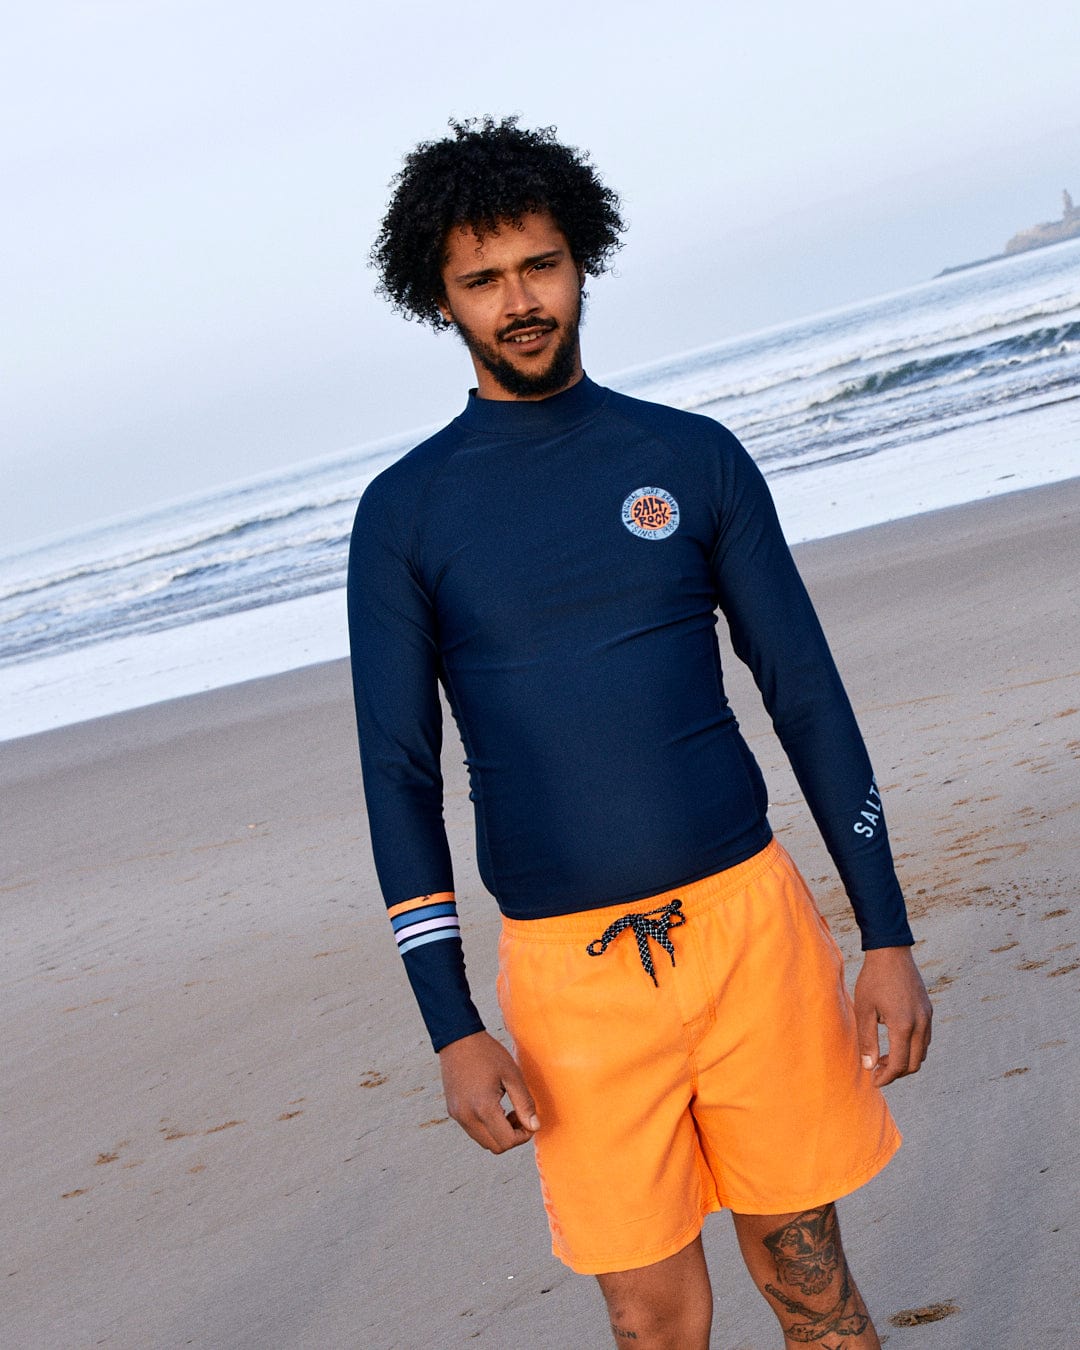 Man in a Saltrock SR Original - Recycled Mens Long Sleeve Rashvest - Blue and orange boardshorts made of Recycled Polyester, standing on a beach with the ocean in the background.